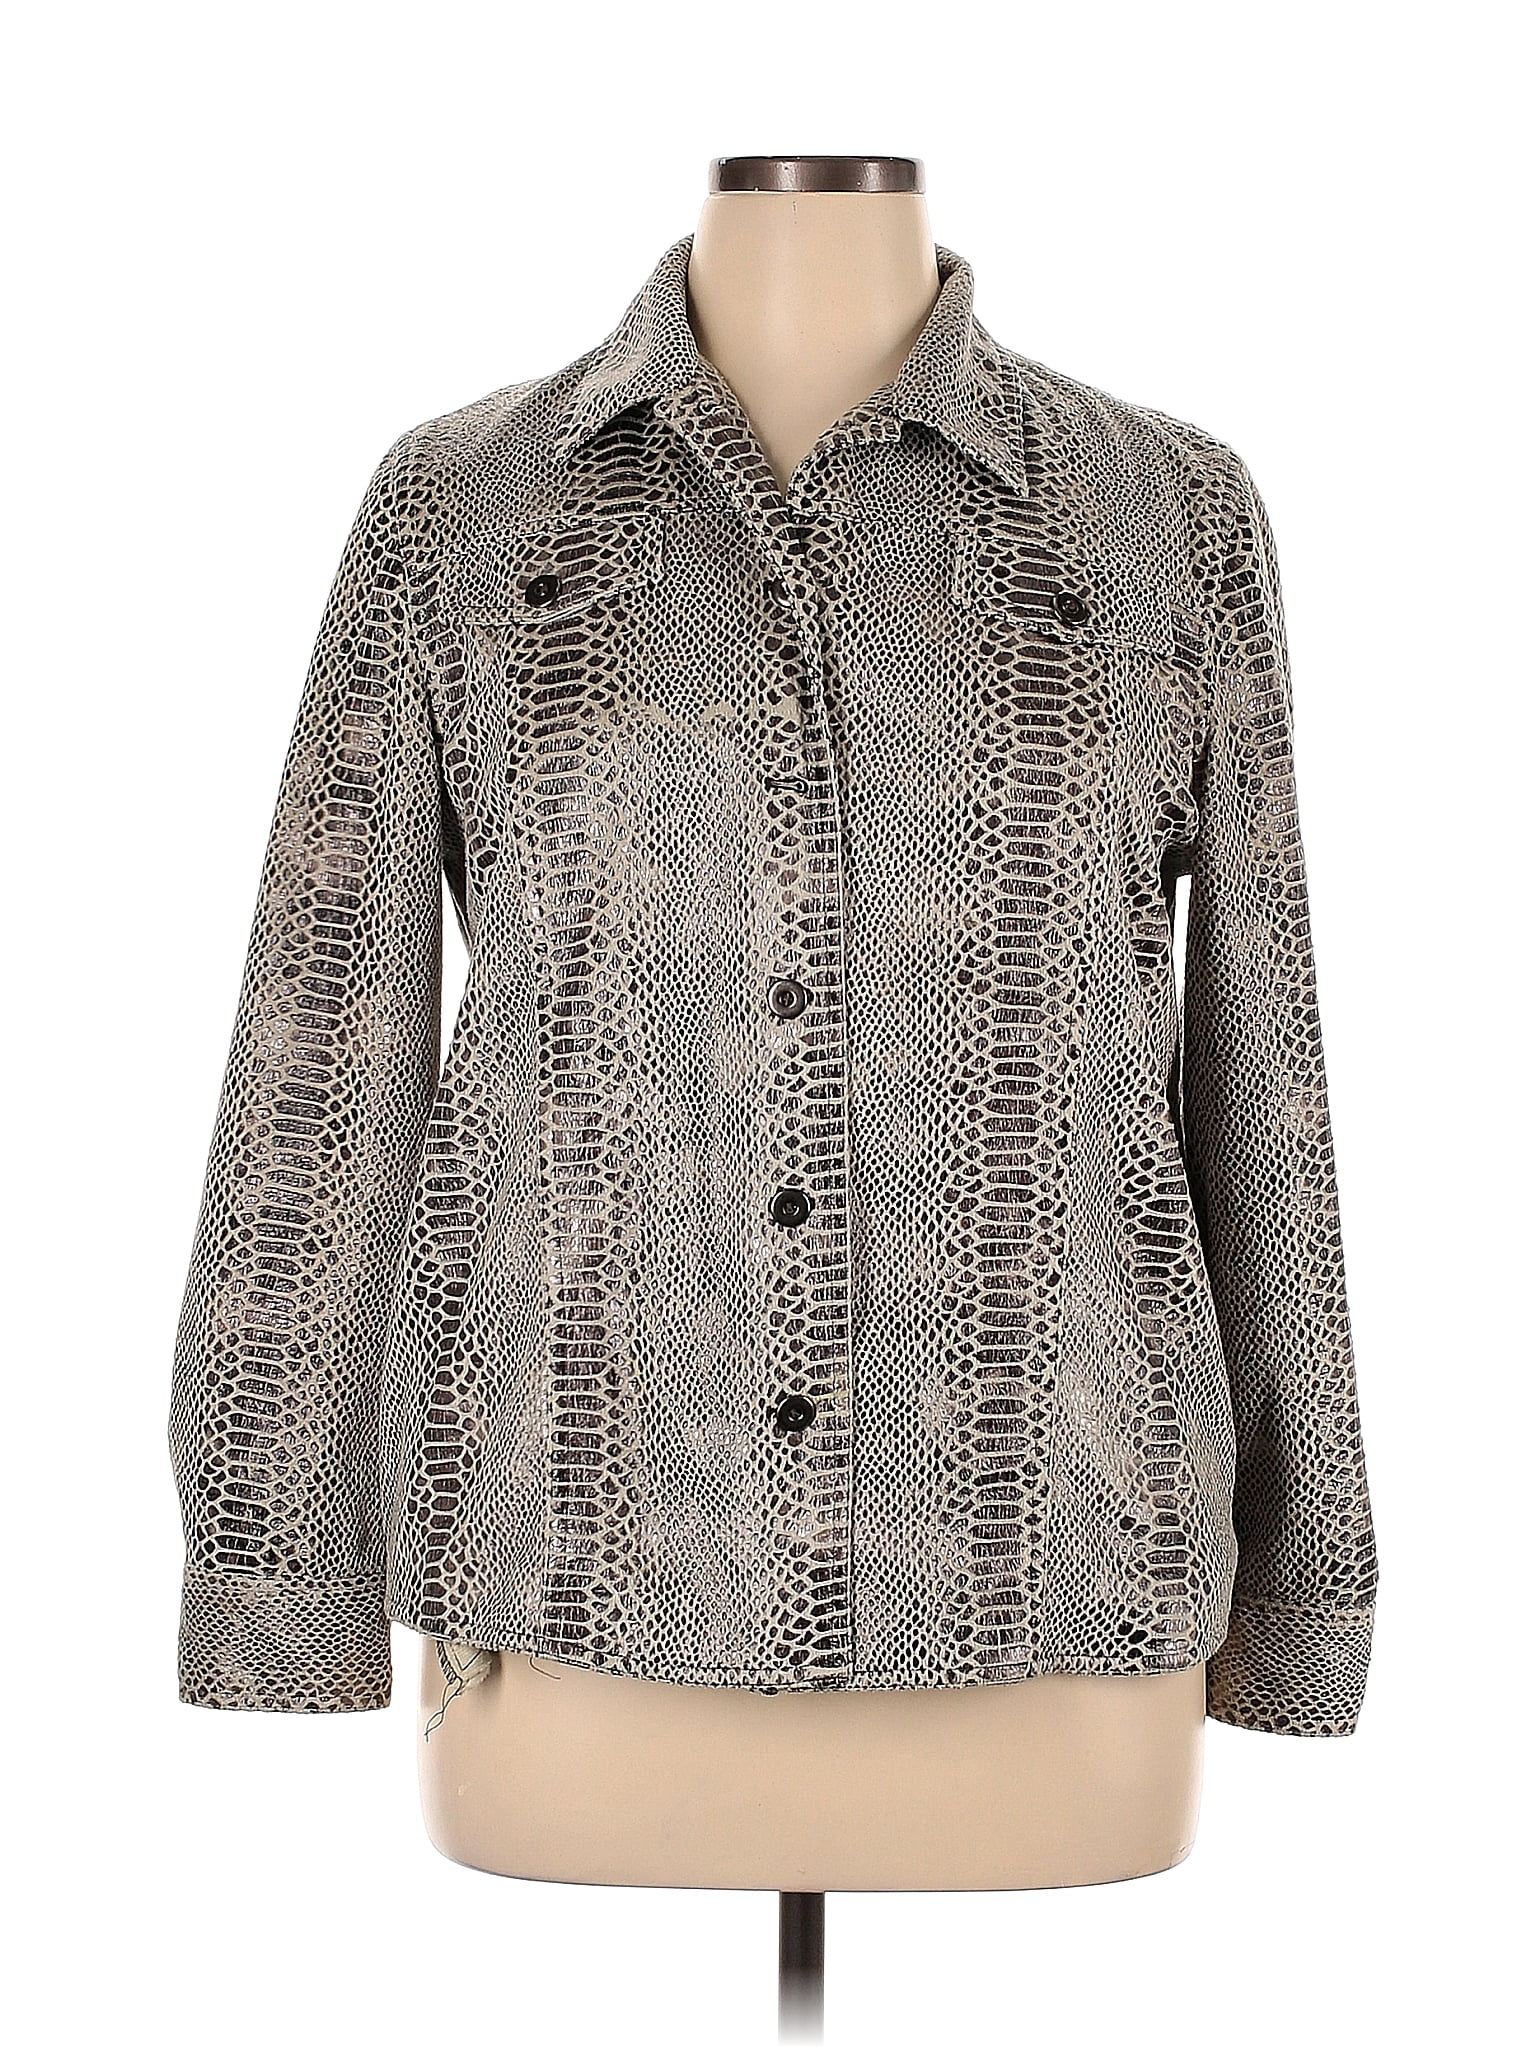 Alfred Dunner 100% Polyester Snake Print Gray Jacket Size 14 - 60% off ...